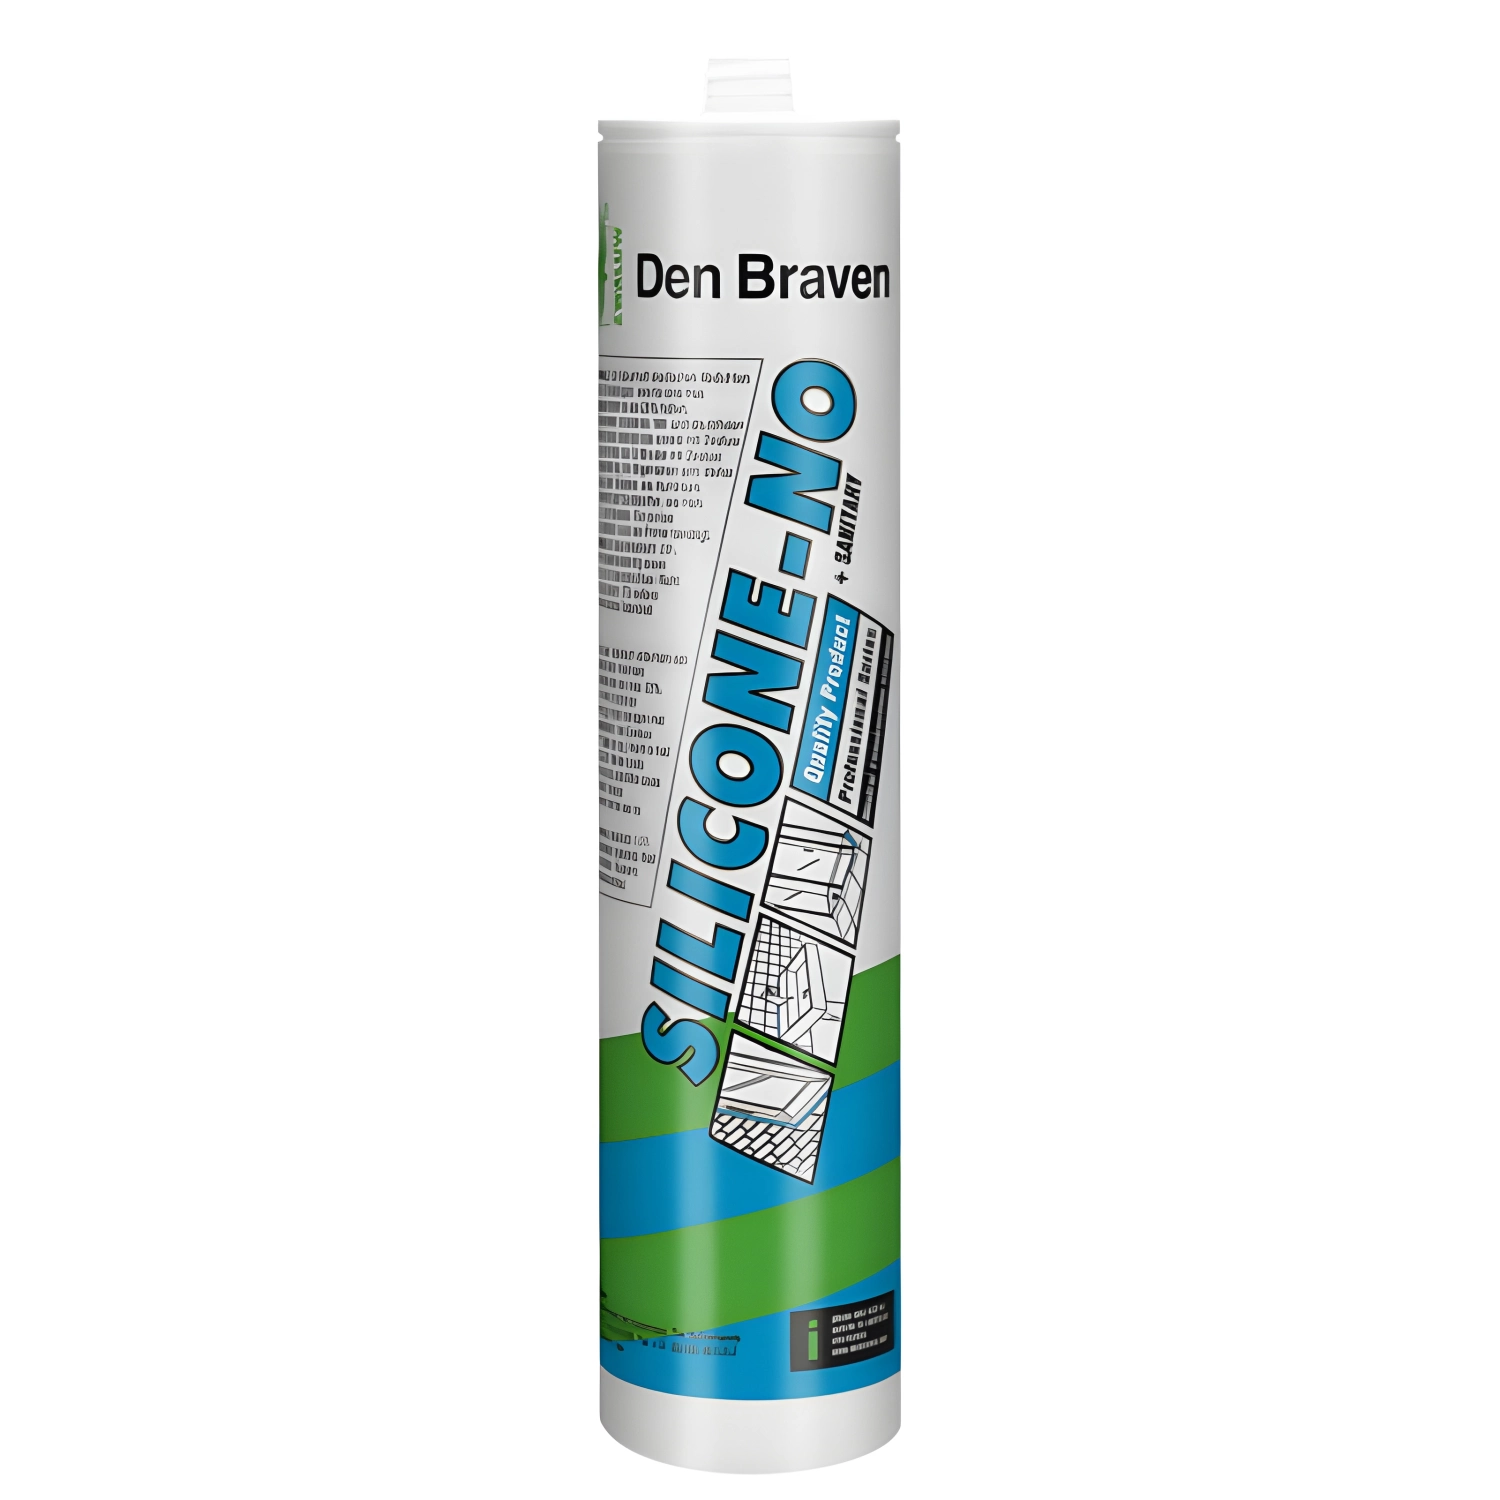 SILICONE MASTIC MACONNERIE BLANC 310 ML